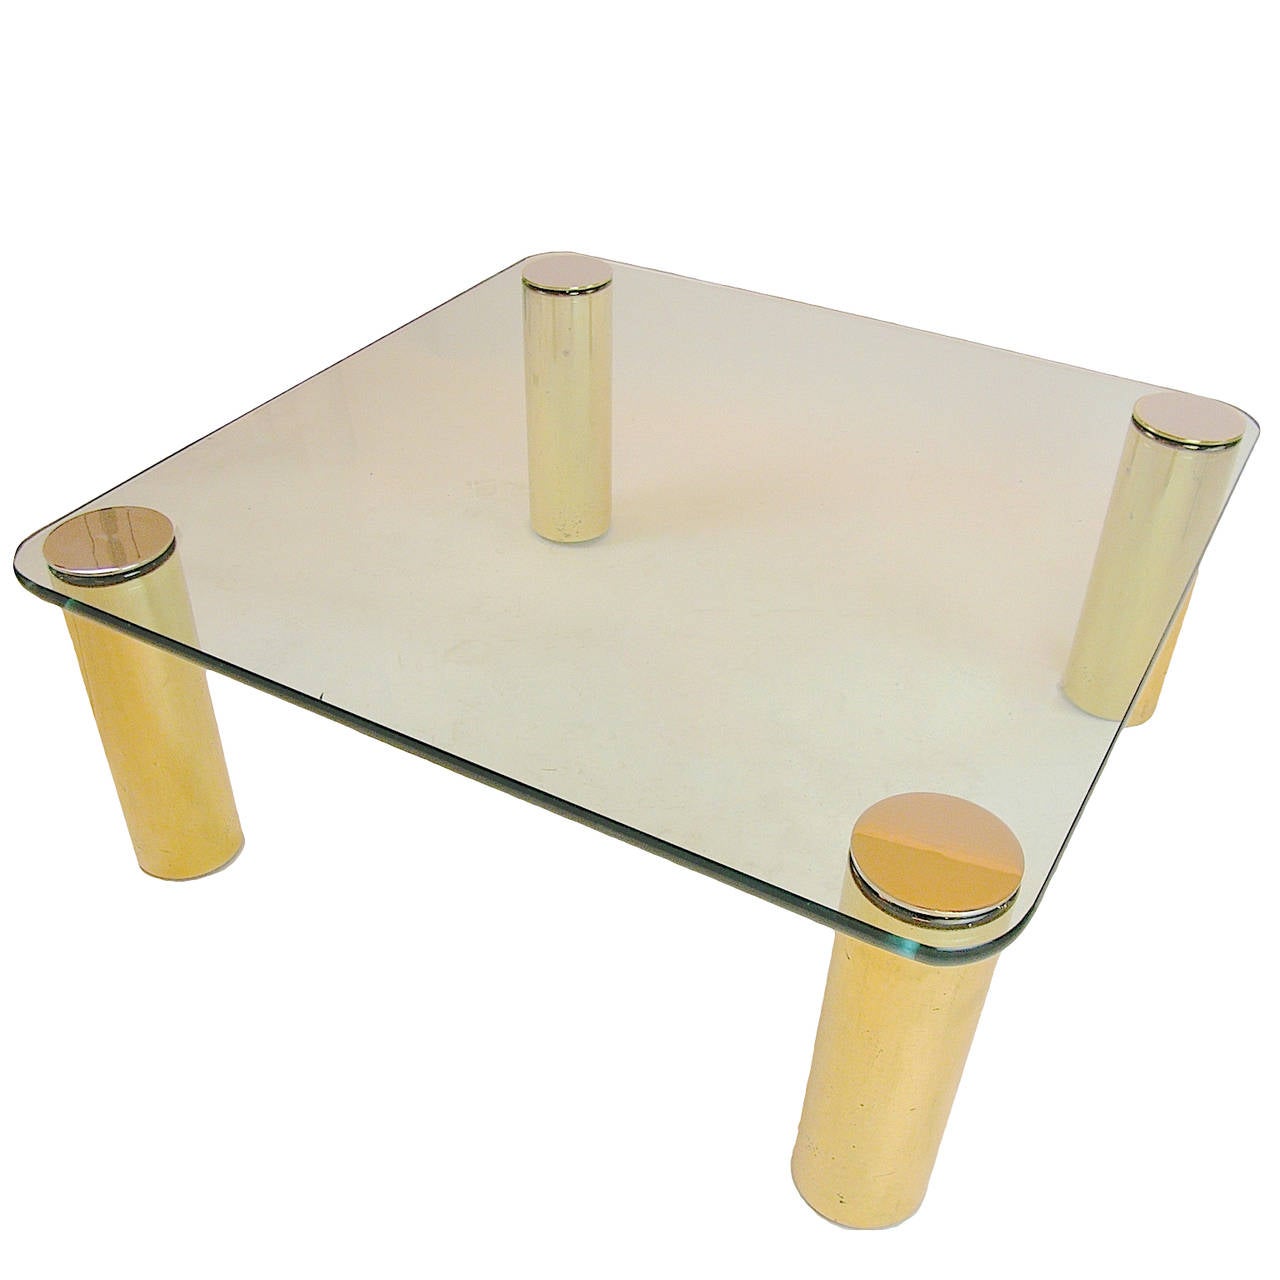 Pace glass top coffee table with 5 inch cylinder legs.